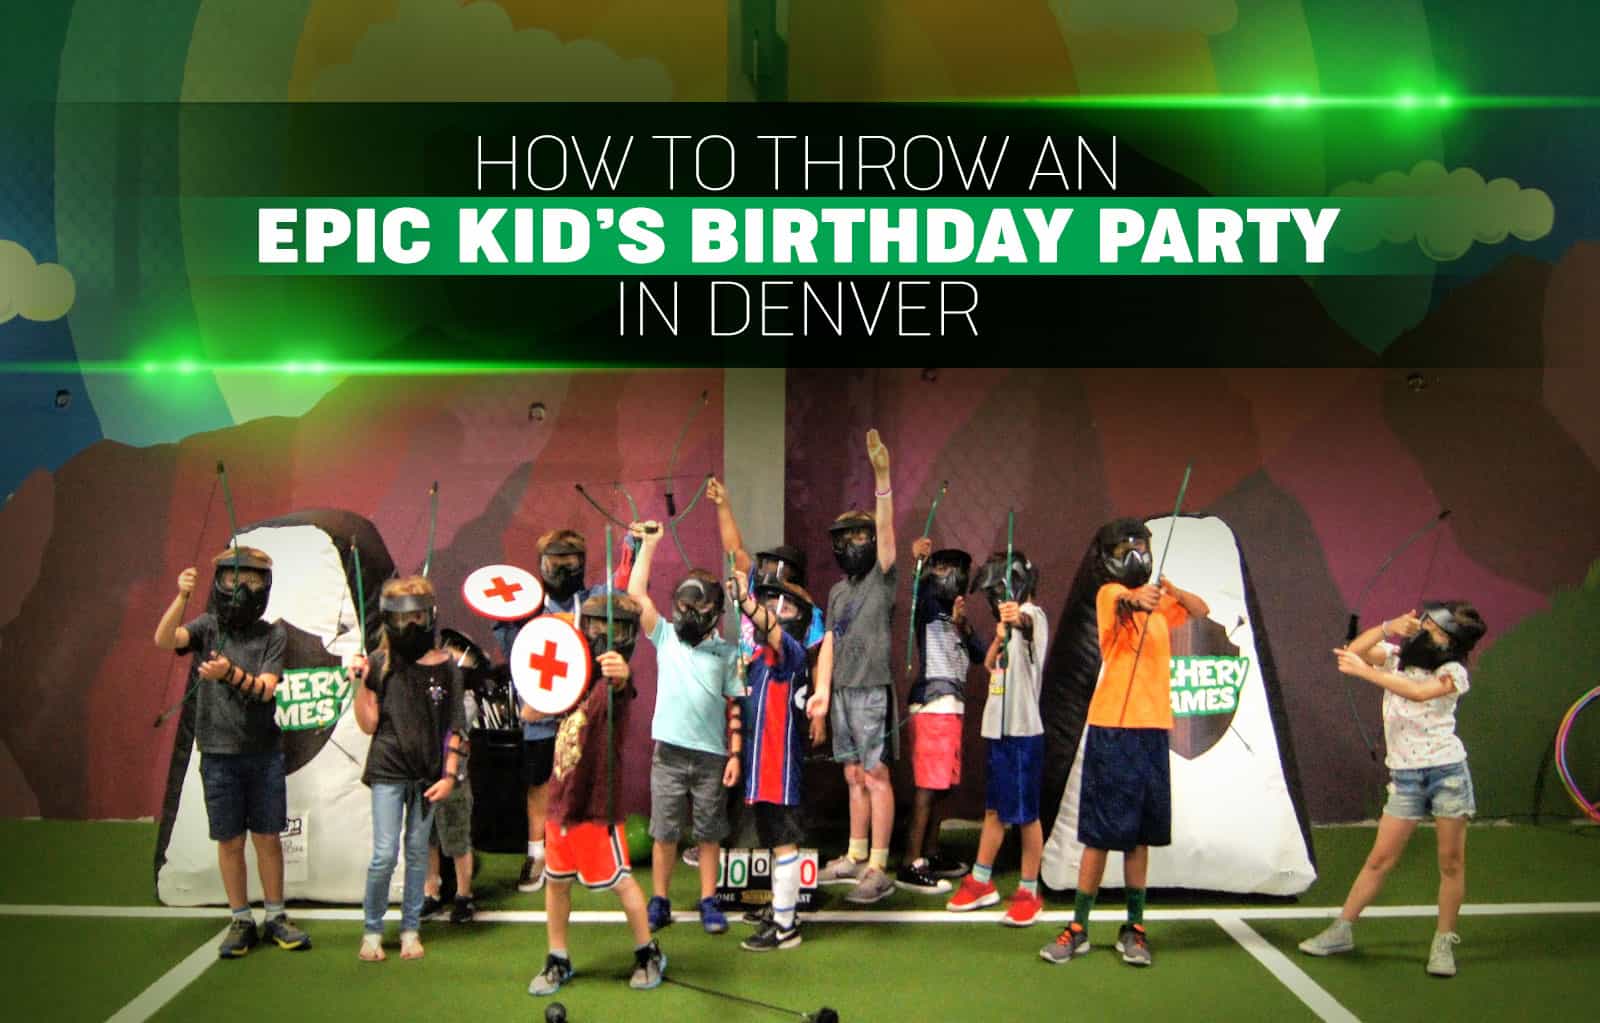 How To Throw An Epic Kid’s Birthday Party In Denver